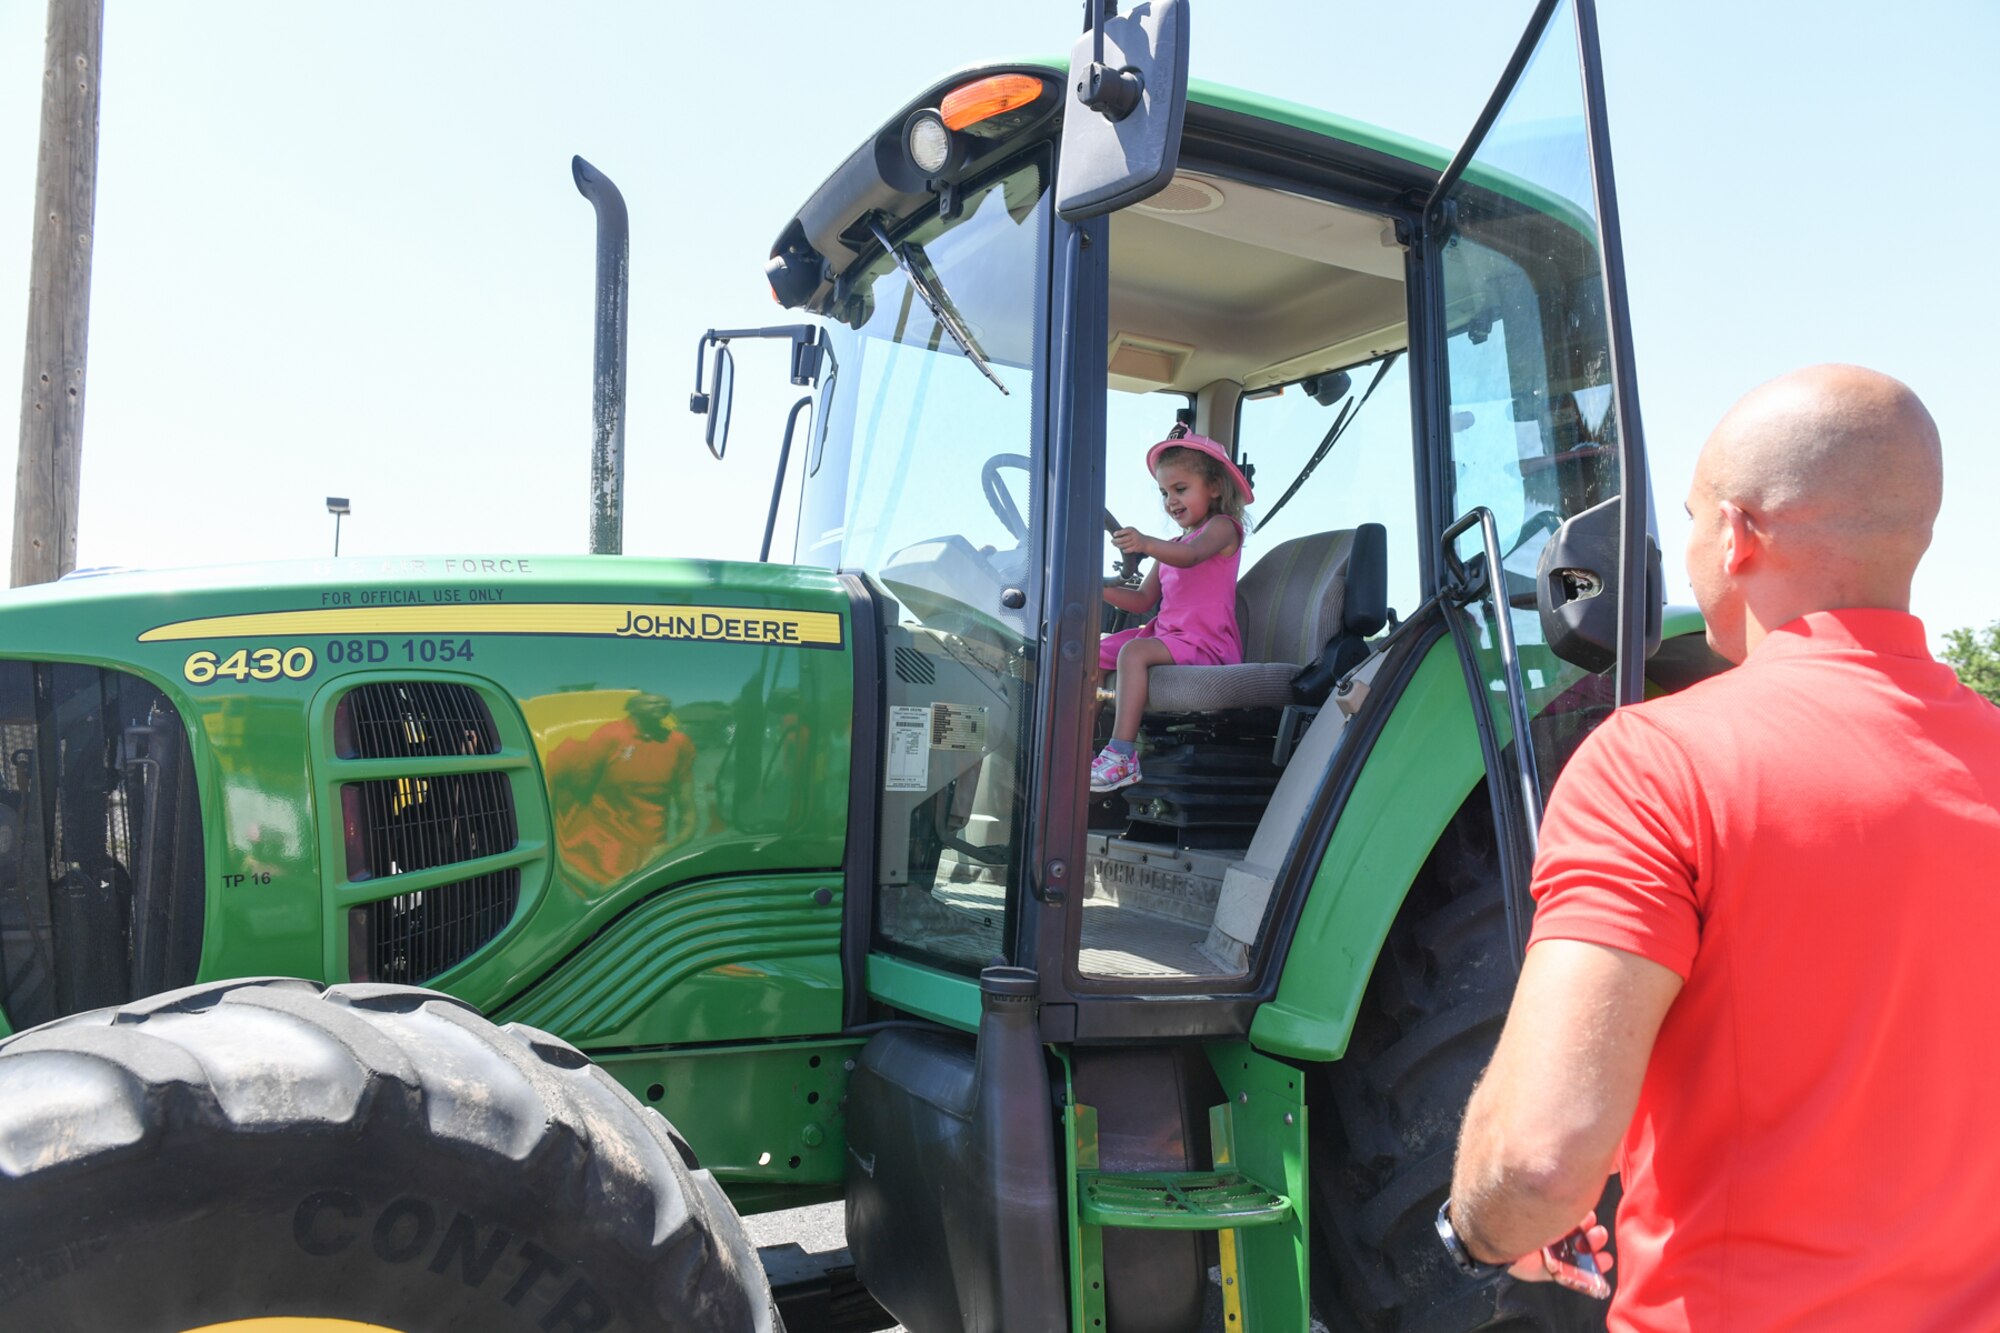 Winnona Walker and her father Matt admire a tractor at Wheels of Wonder June 8, 2018, at Hill Air Force Base, Utah. Wheels of Wonder provides base families a fun, hands-on experience exploring various types of vehicles.